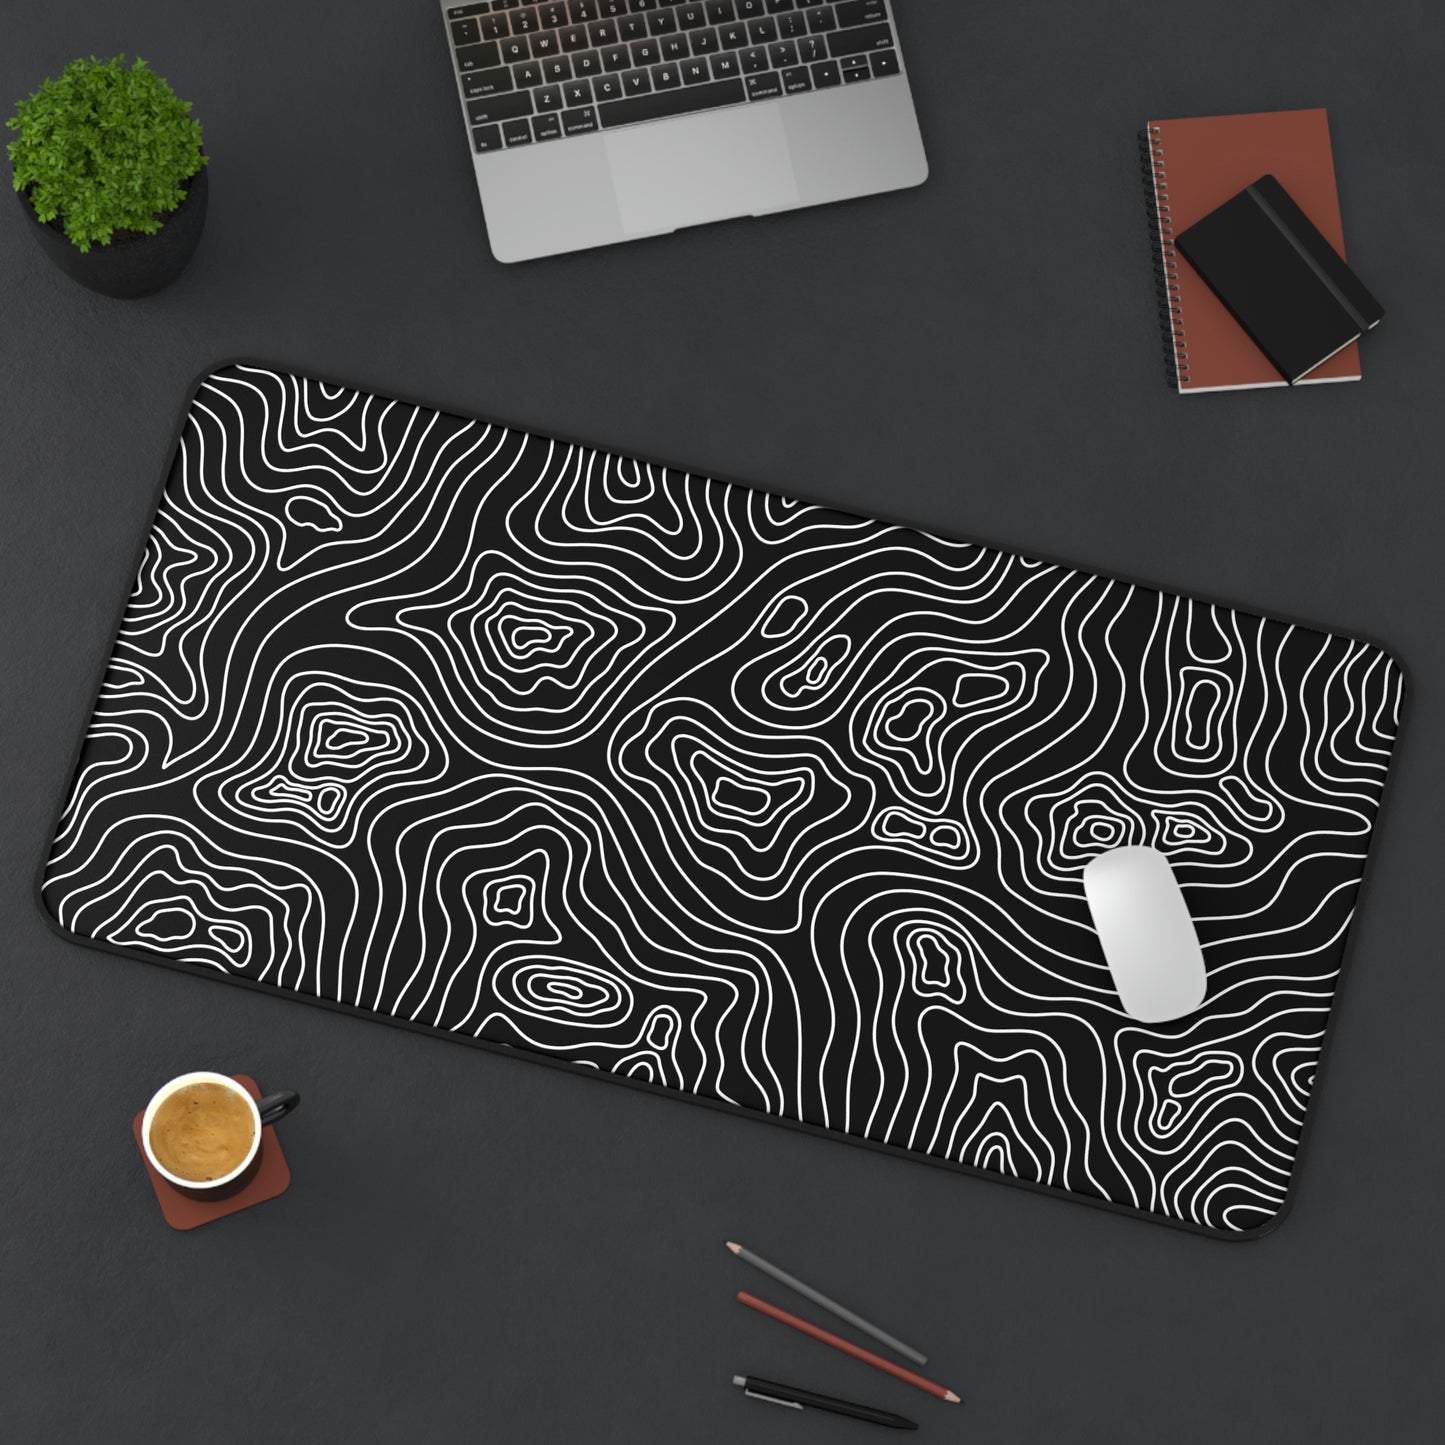 A 31" x 15.5" black desk mat with white topographic lines sitting at an angle. A mouse sits on top of it.